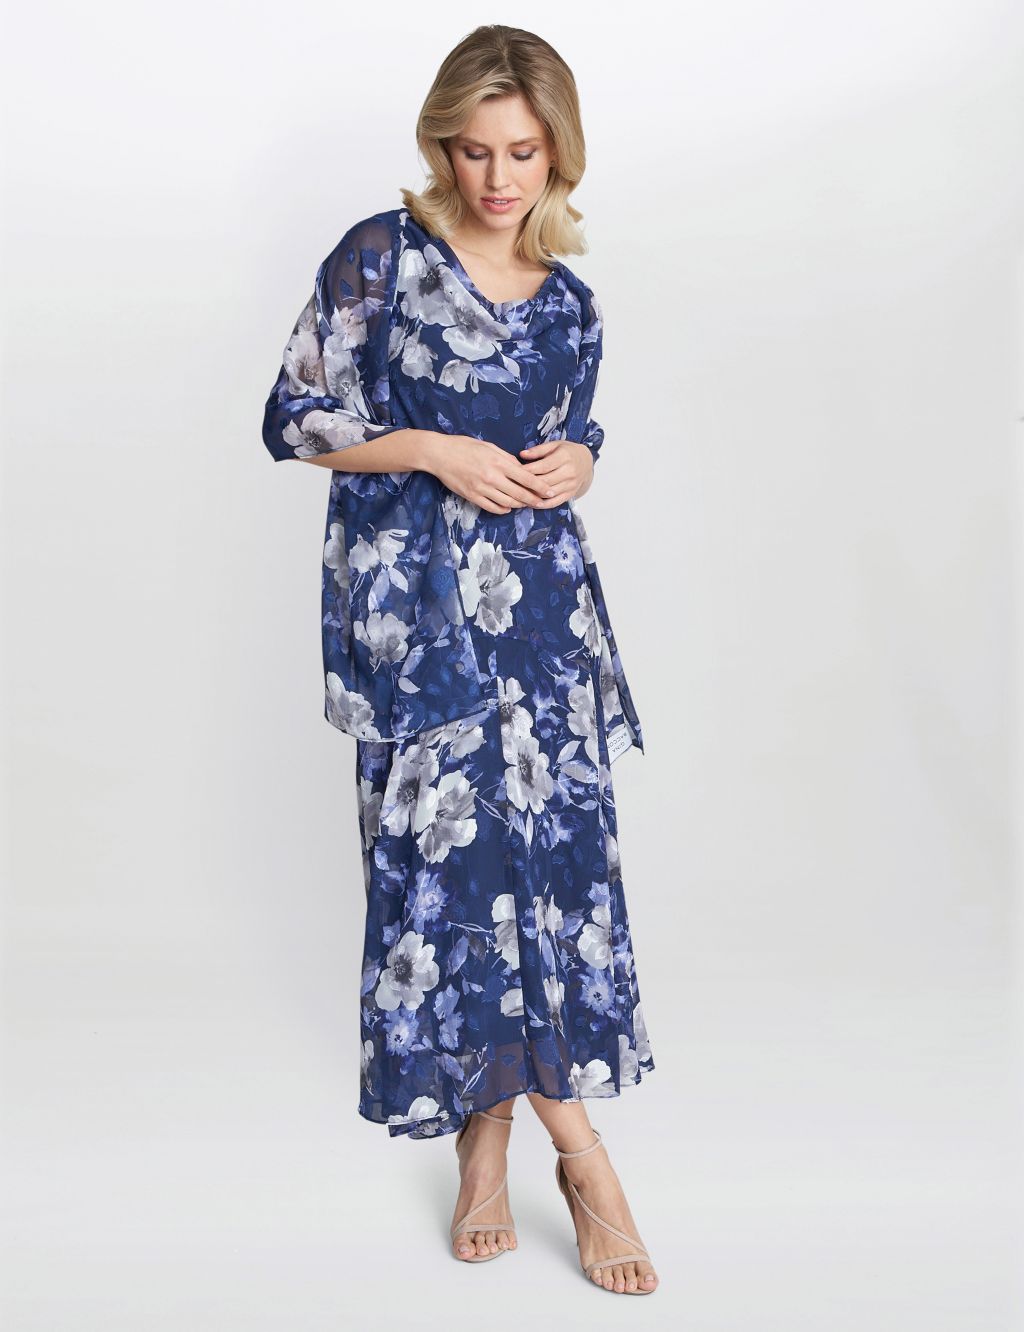 Floral Cowl Neck Maxi Swing Dress with Shawl image 2